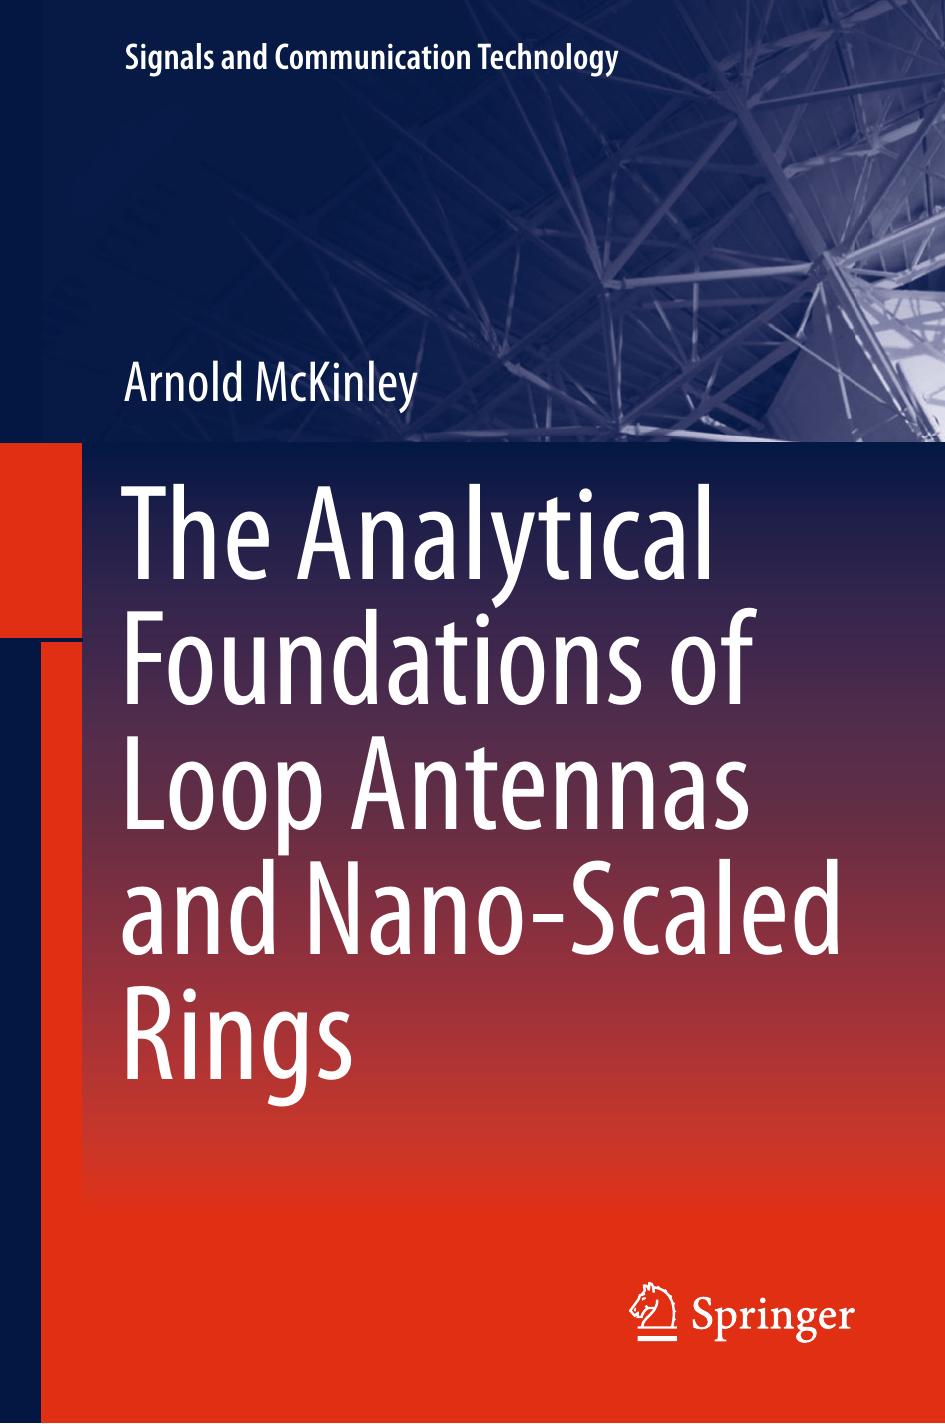 The Analytical Foundations of Loop Antennas and Nano-Scaled Rings by Arnold McKinley